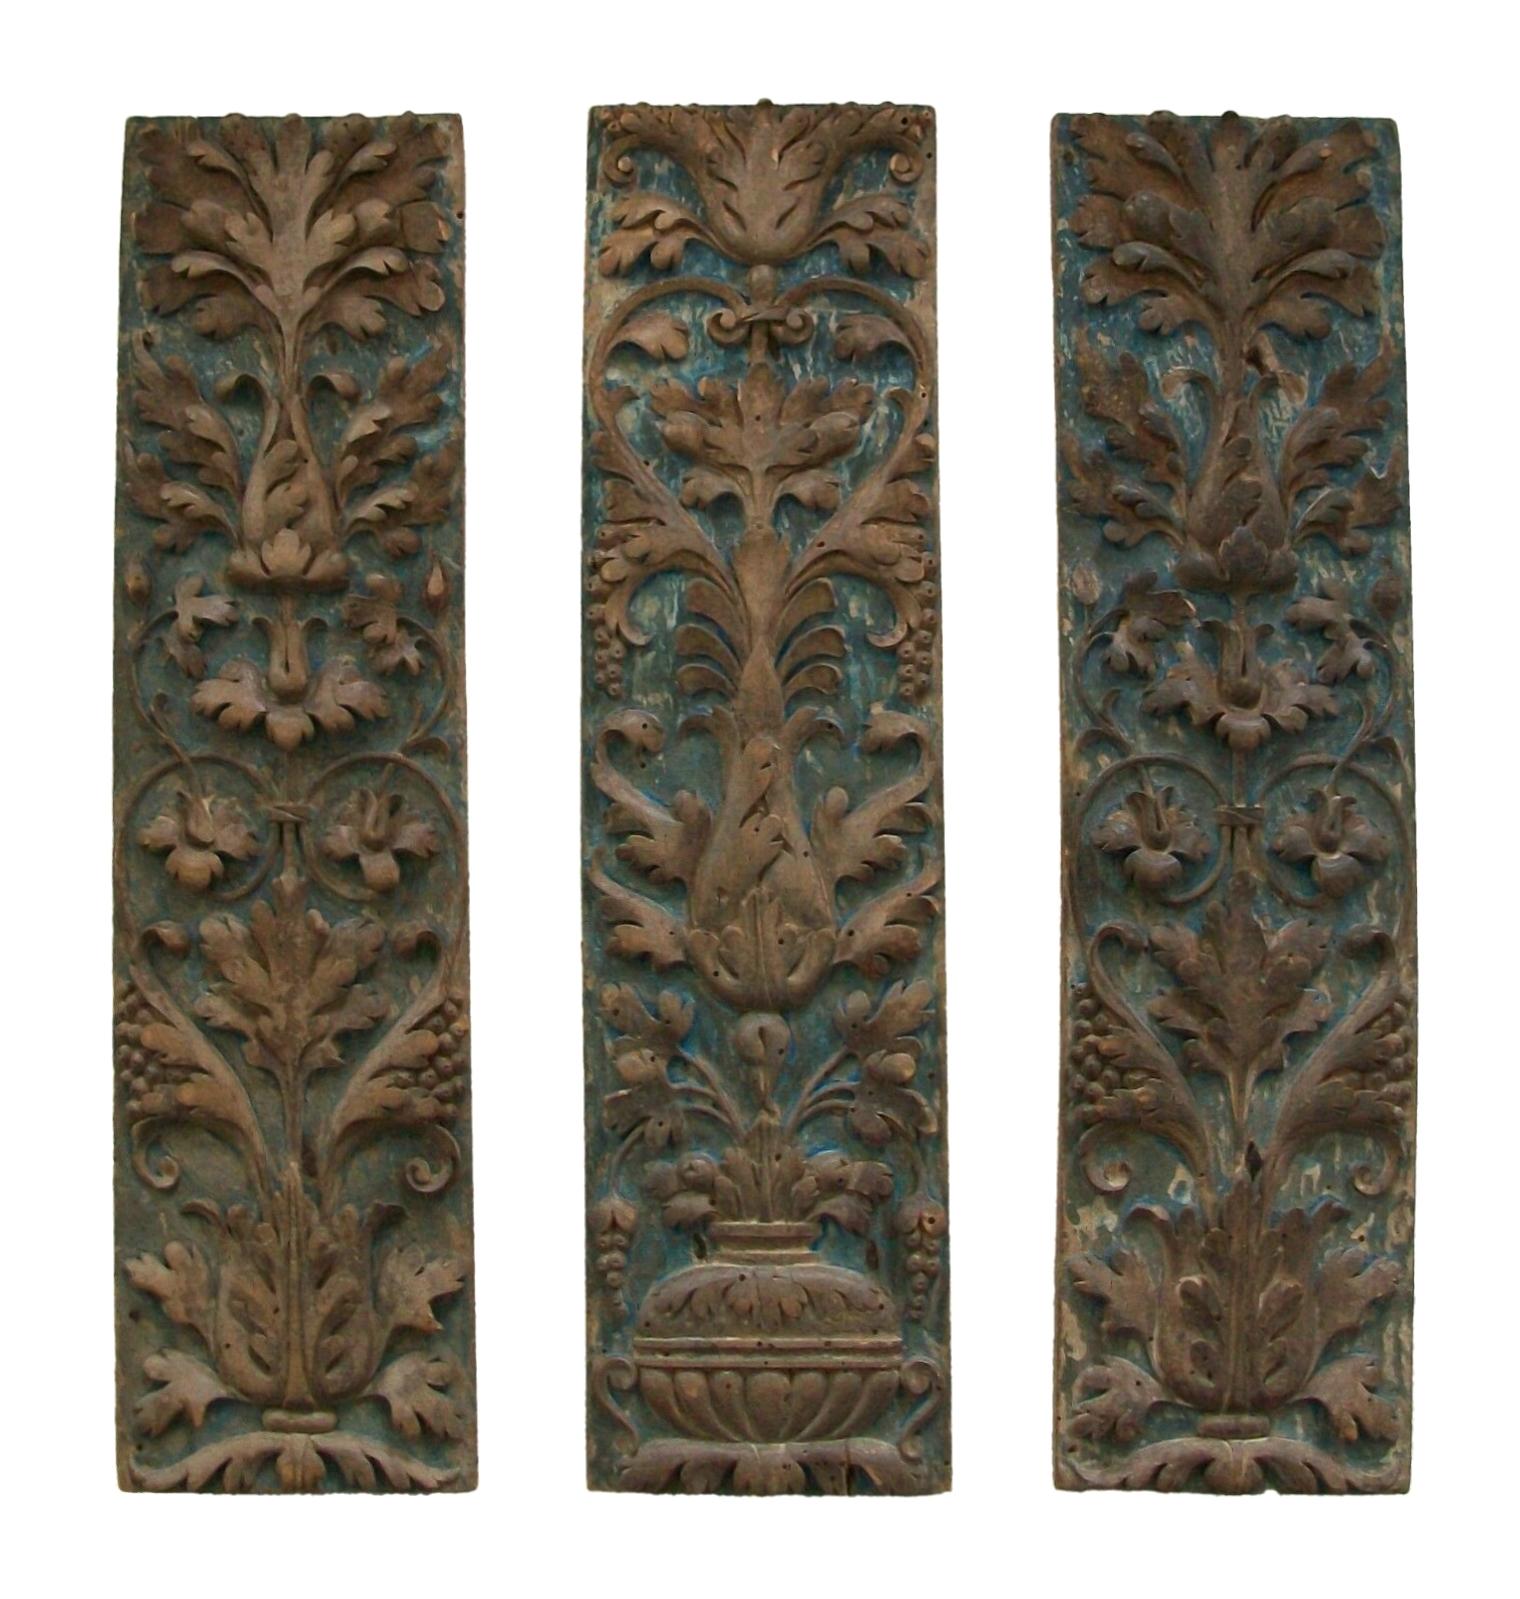 Exceptional Renaissance 'Grotesque' carved fruit-wood panels - featuring finely carved acanthus leaves bursting with fruit and flowers - retaining traces of the original gilded finish - original blue 'faux marble' painted backgrounds - one panel